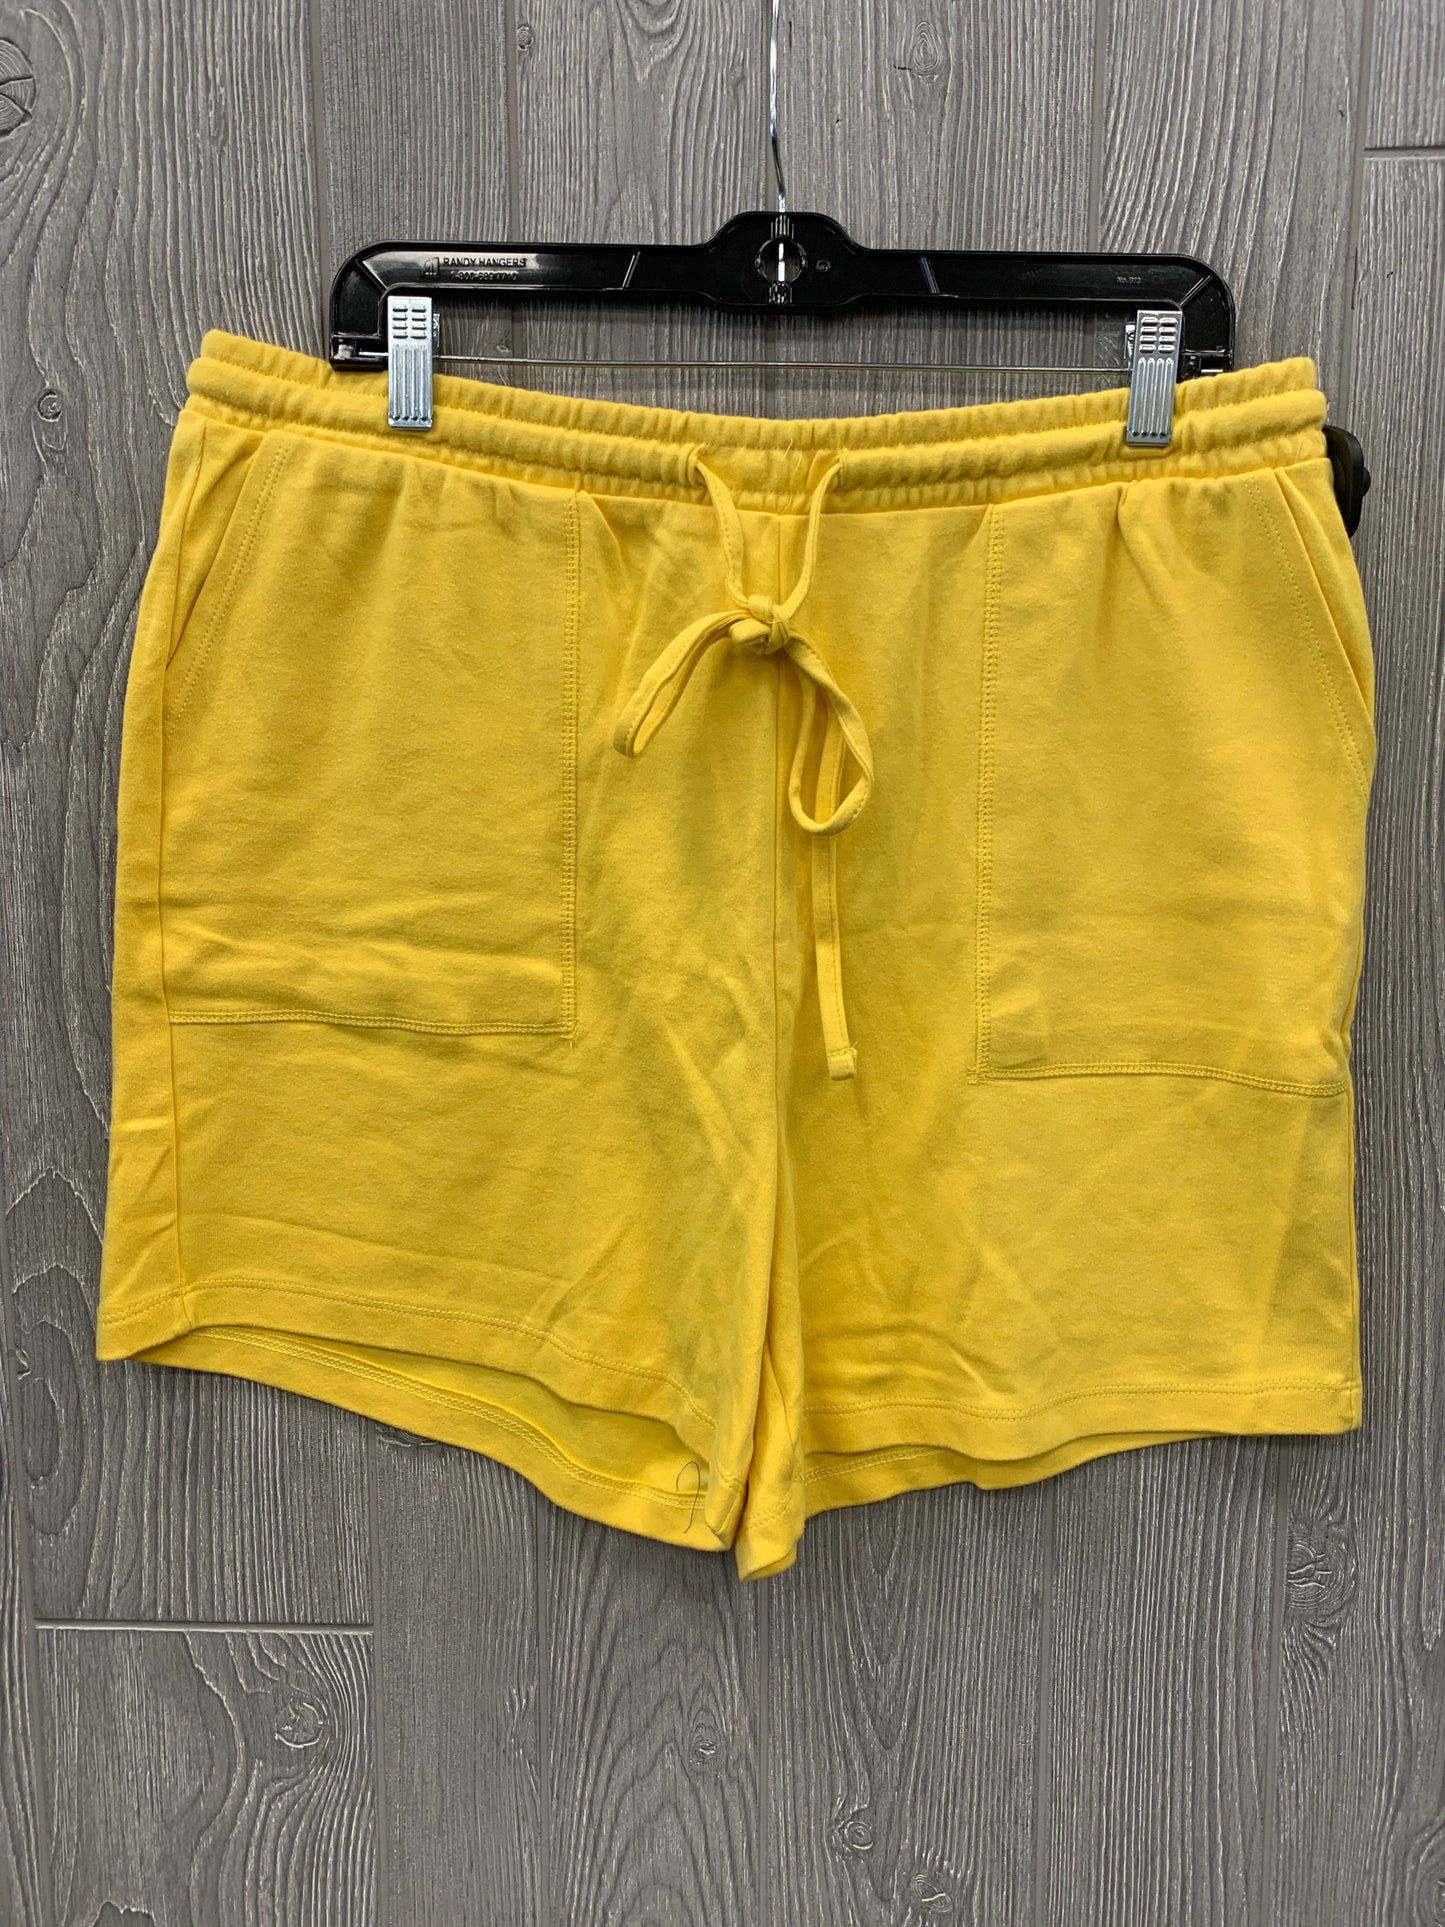 Shorts By Zenana Outfitters  Size: 18